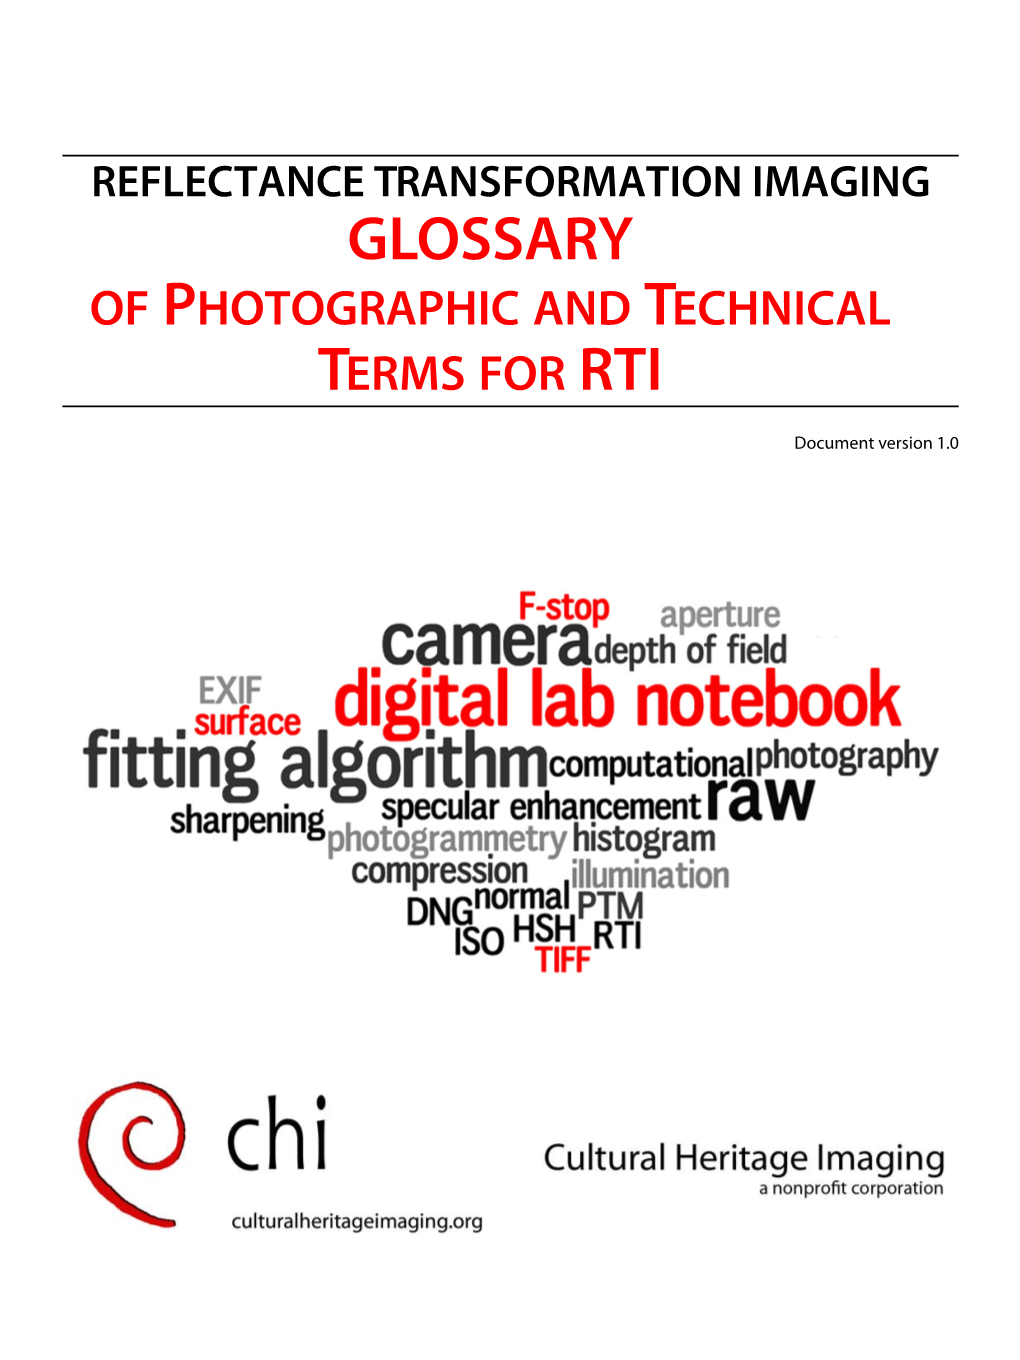 RTI Glossary of Photographic and Technical Terms